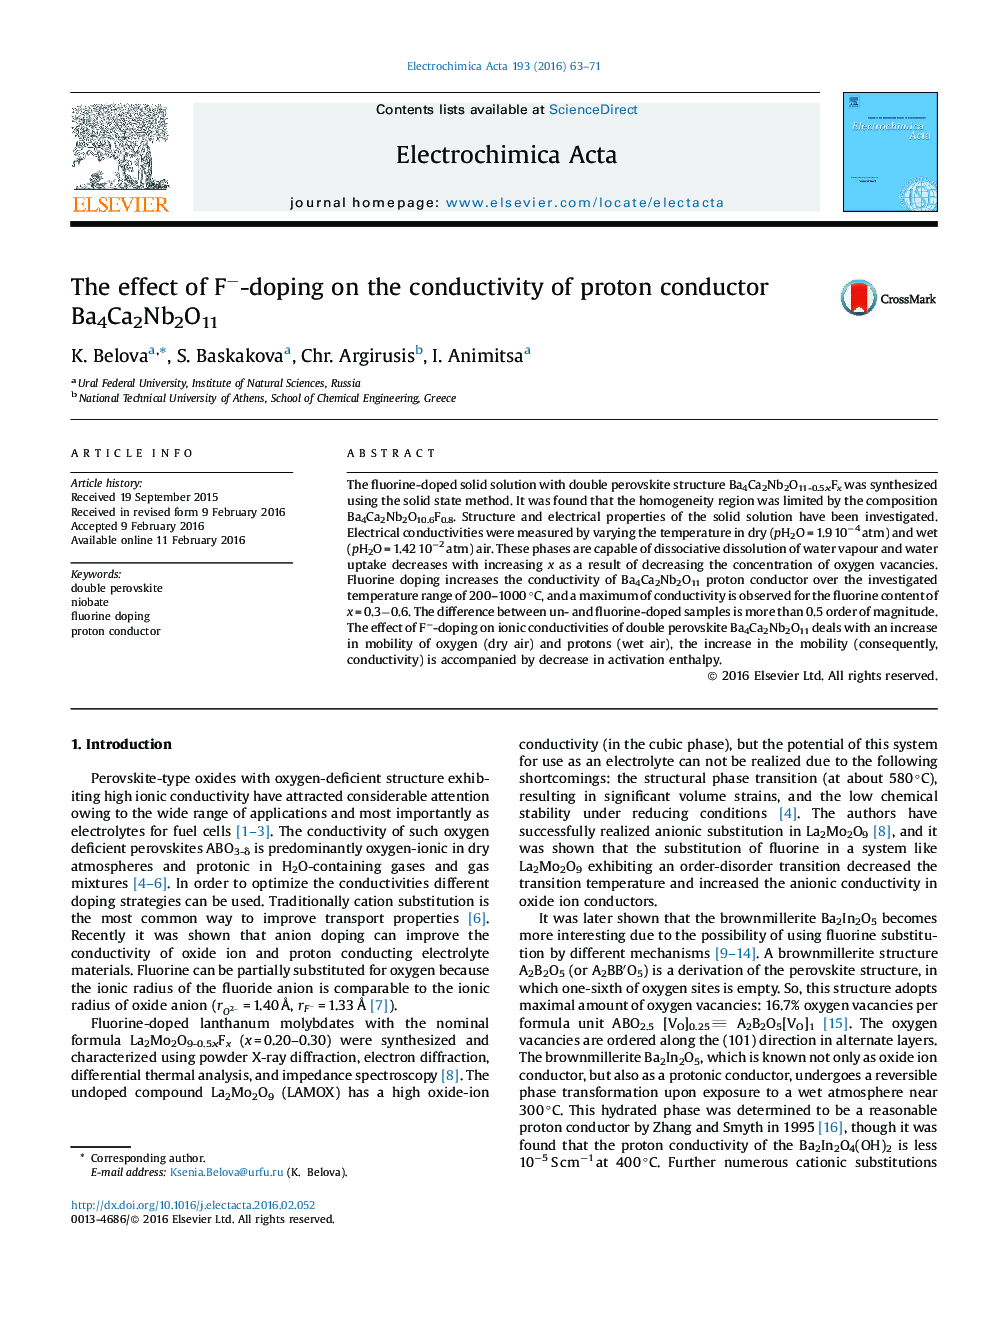 The effect of F−-doping on the conductivity of proton conductor Ba4Ca2Nb2O11